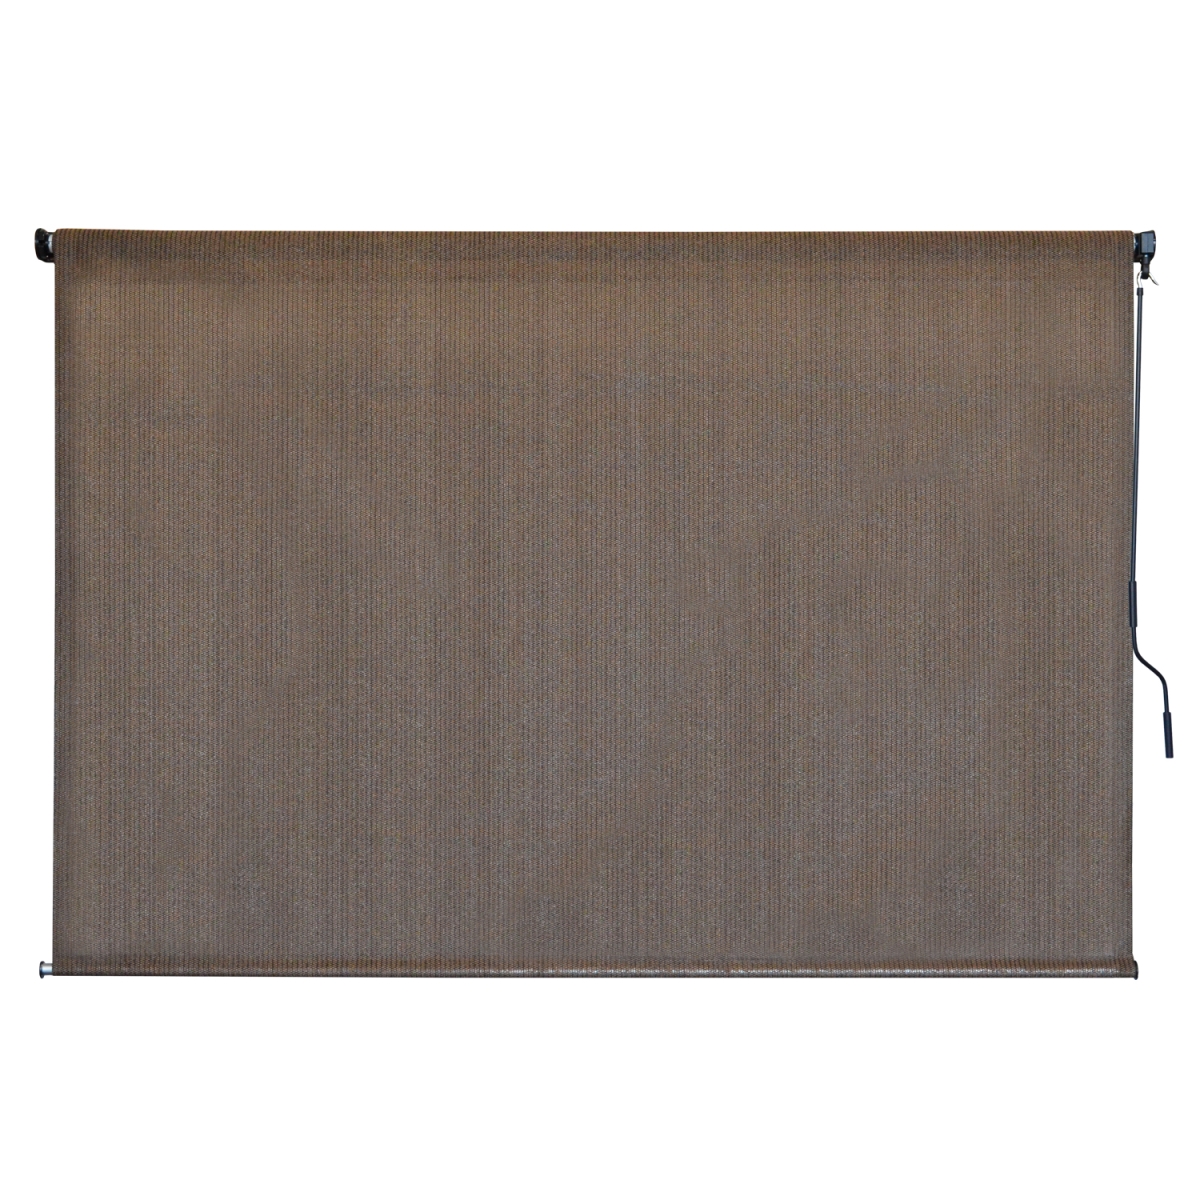 P7120 72 X 72 In. Outdoor Cordless Sun Shade, Cabo Sand